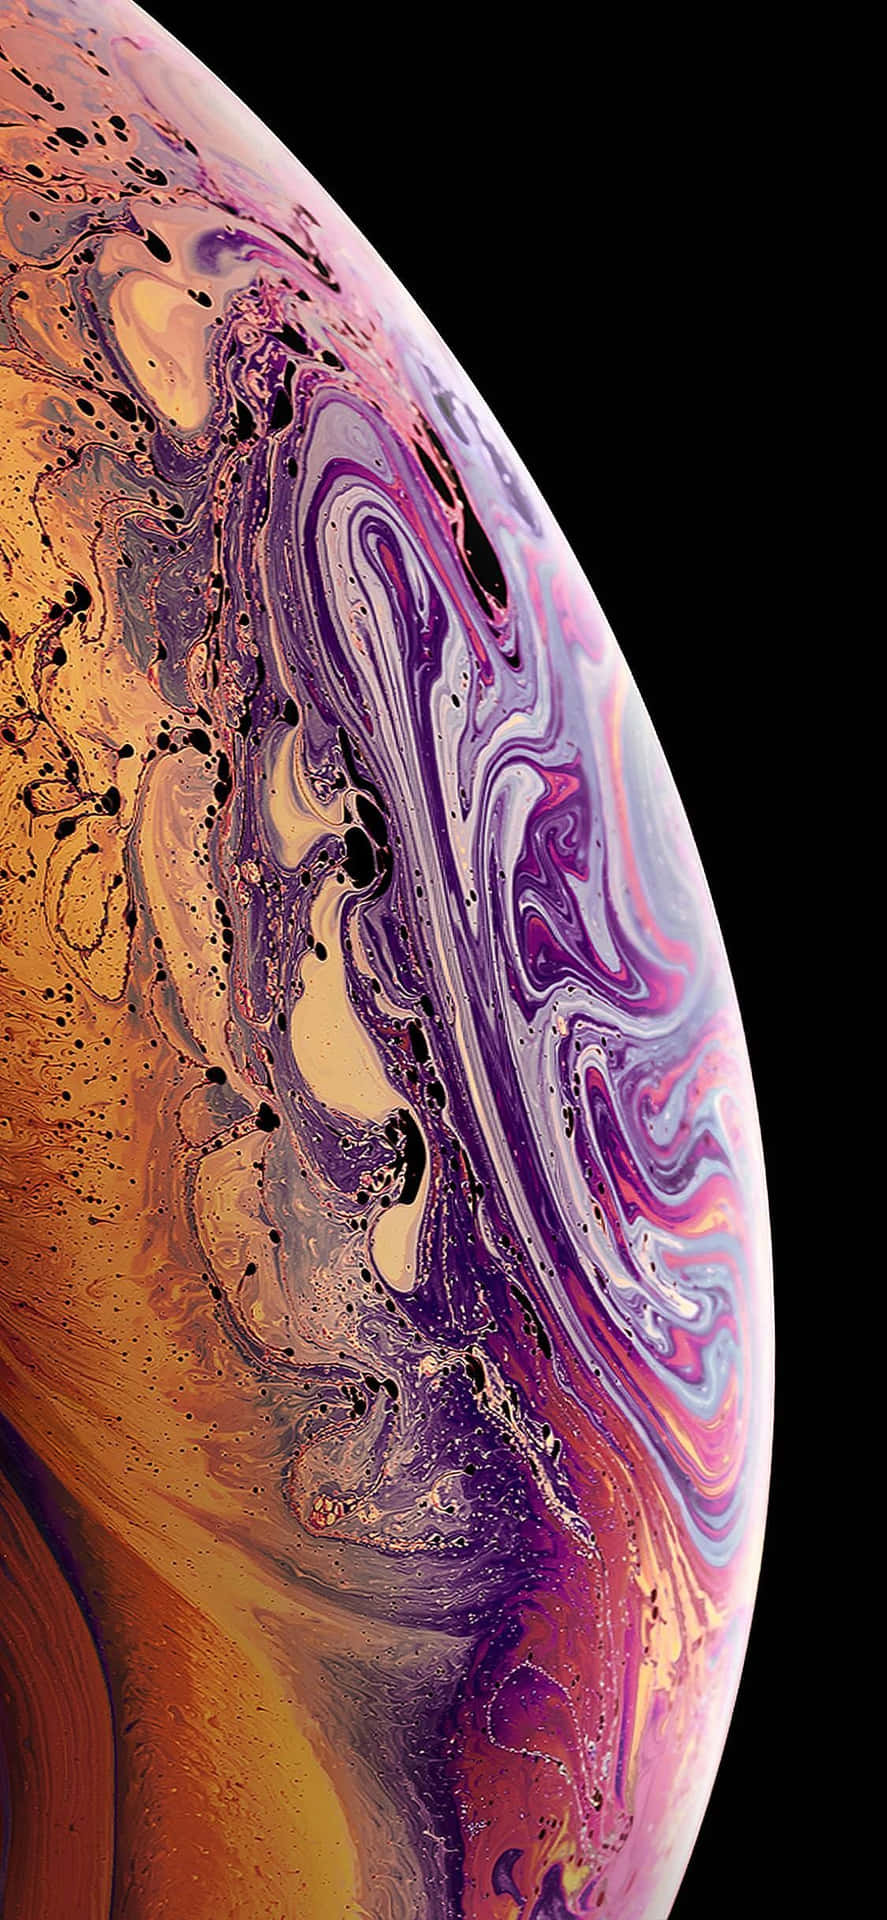 Apple Iphone Xs Pictures Wallpaper